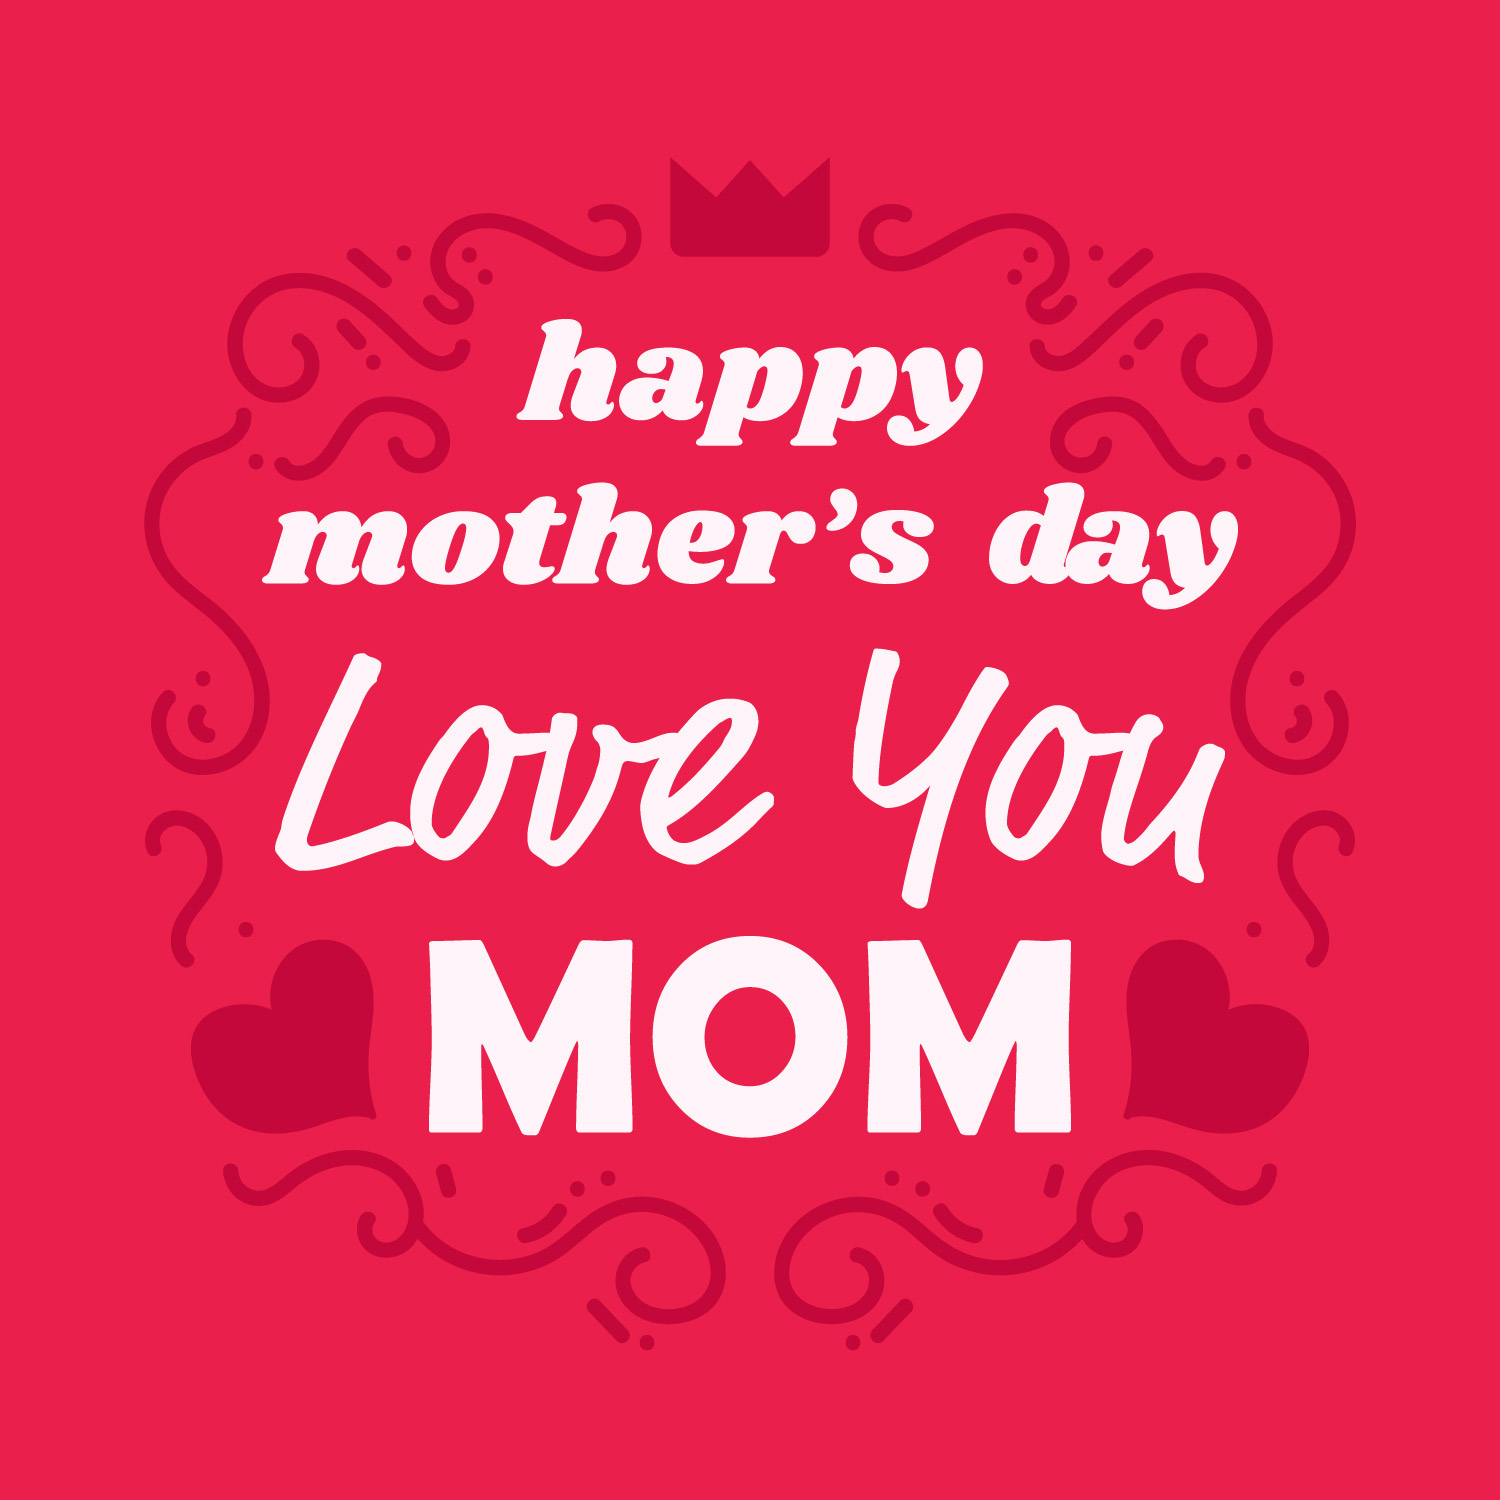 Happy Mothers Day, Love You Mom Card - Download Free ...